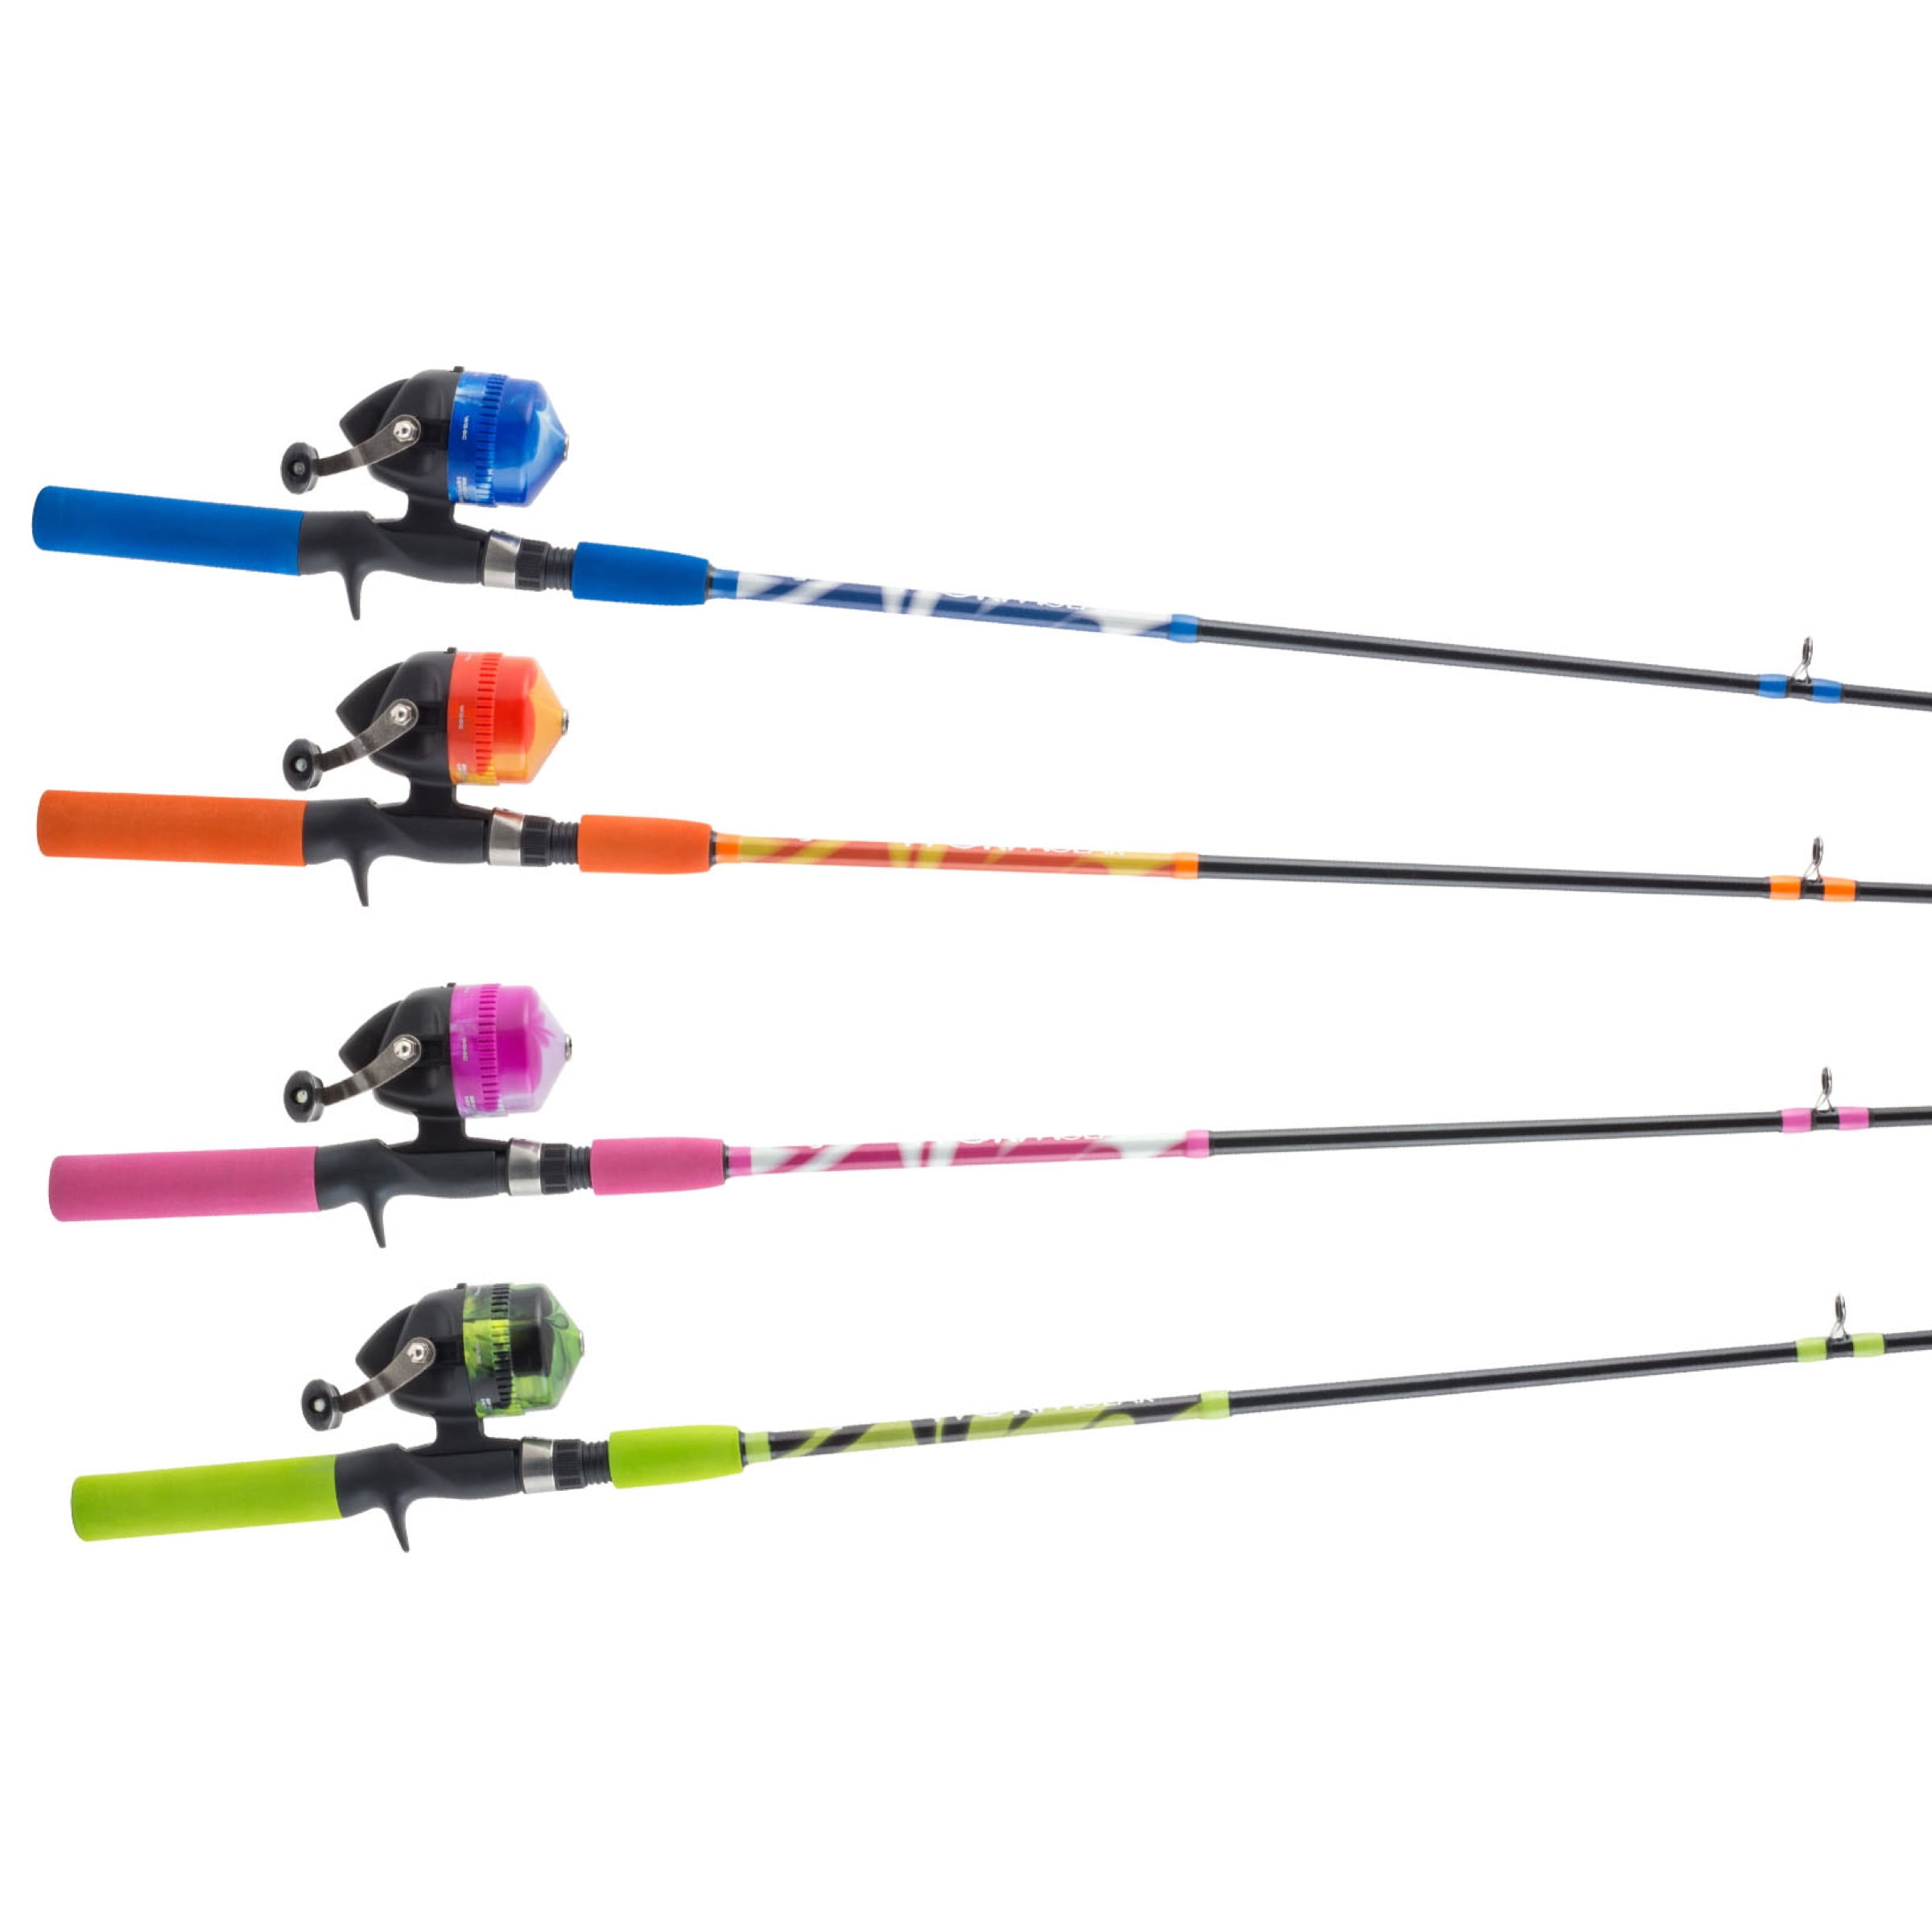 Details about   Southbend Worm Gear Spincast Combo Fishing Rod 